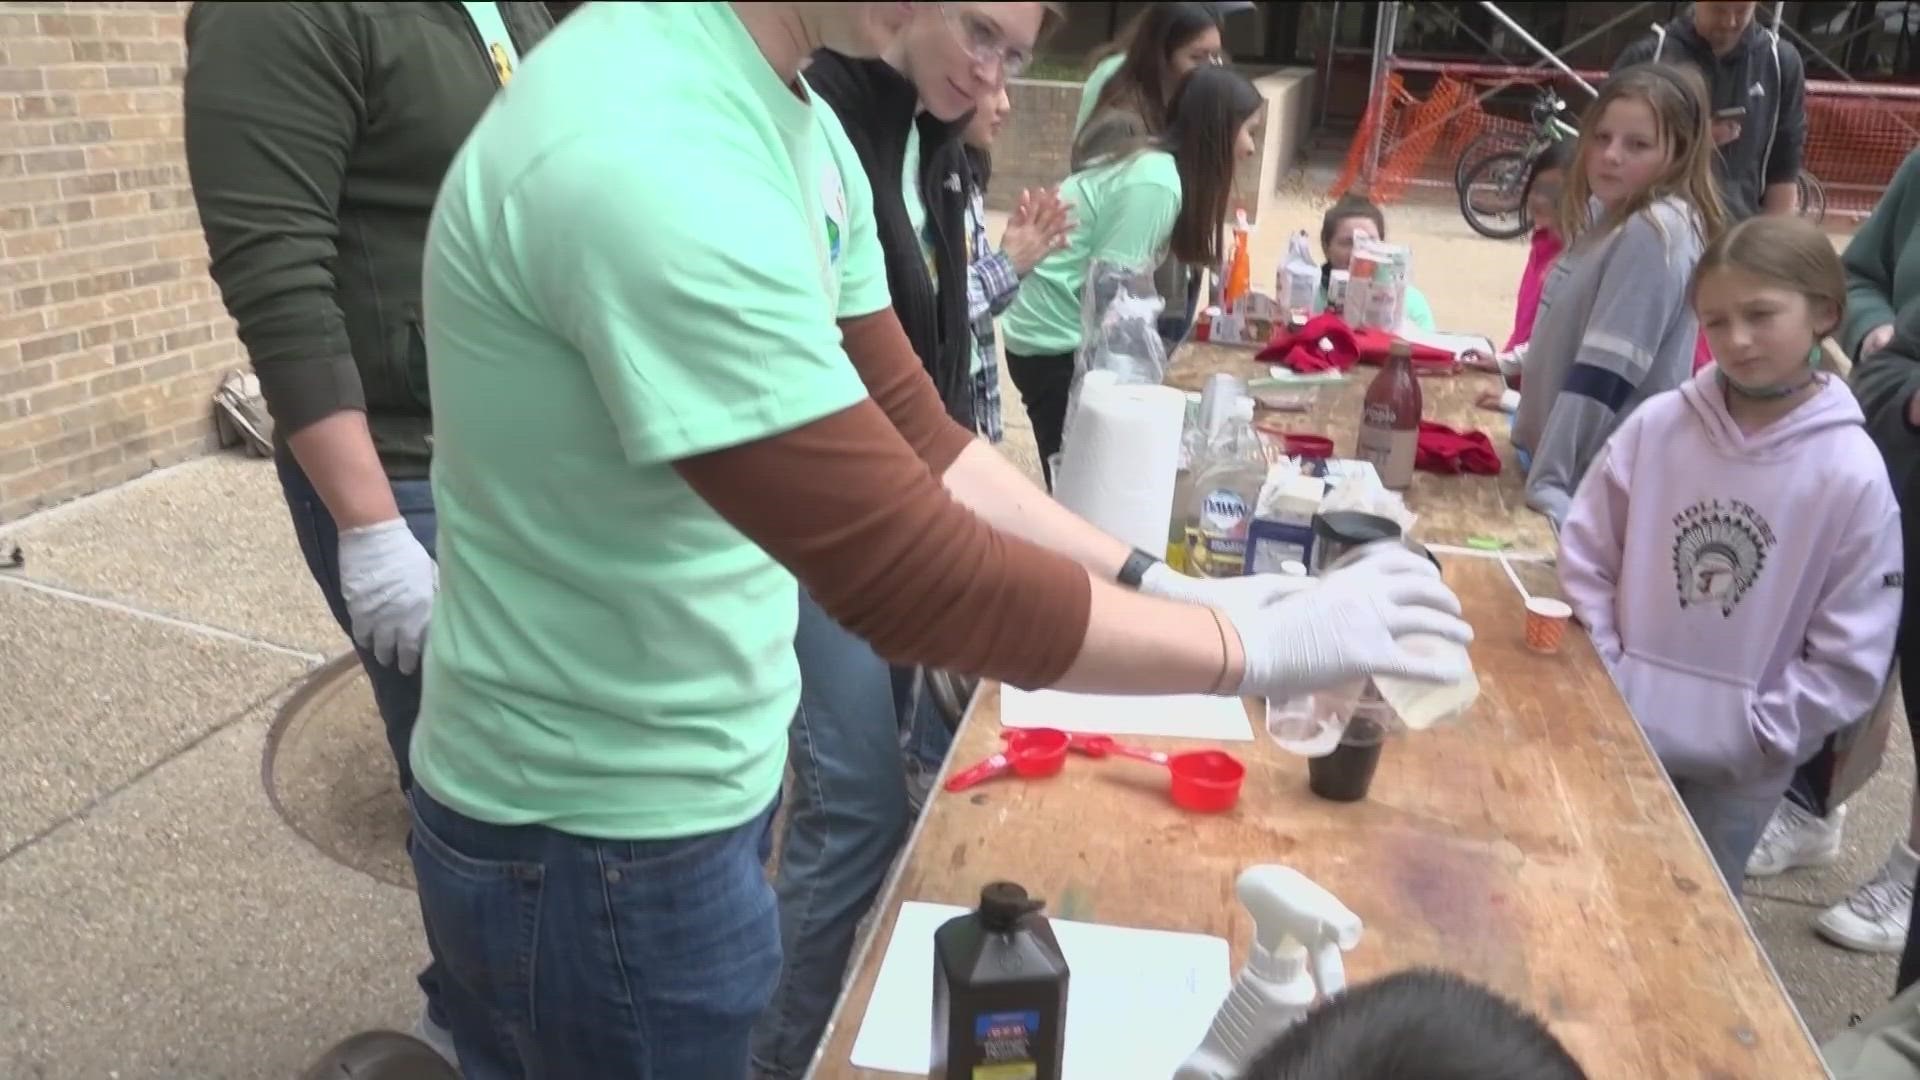 On Saturday, thousands of young girls flocked to UT's campus for the annual STEM Girls Day. There were about 8,000 girls exploring math and science.